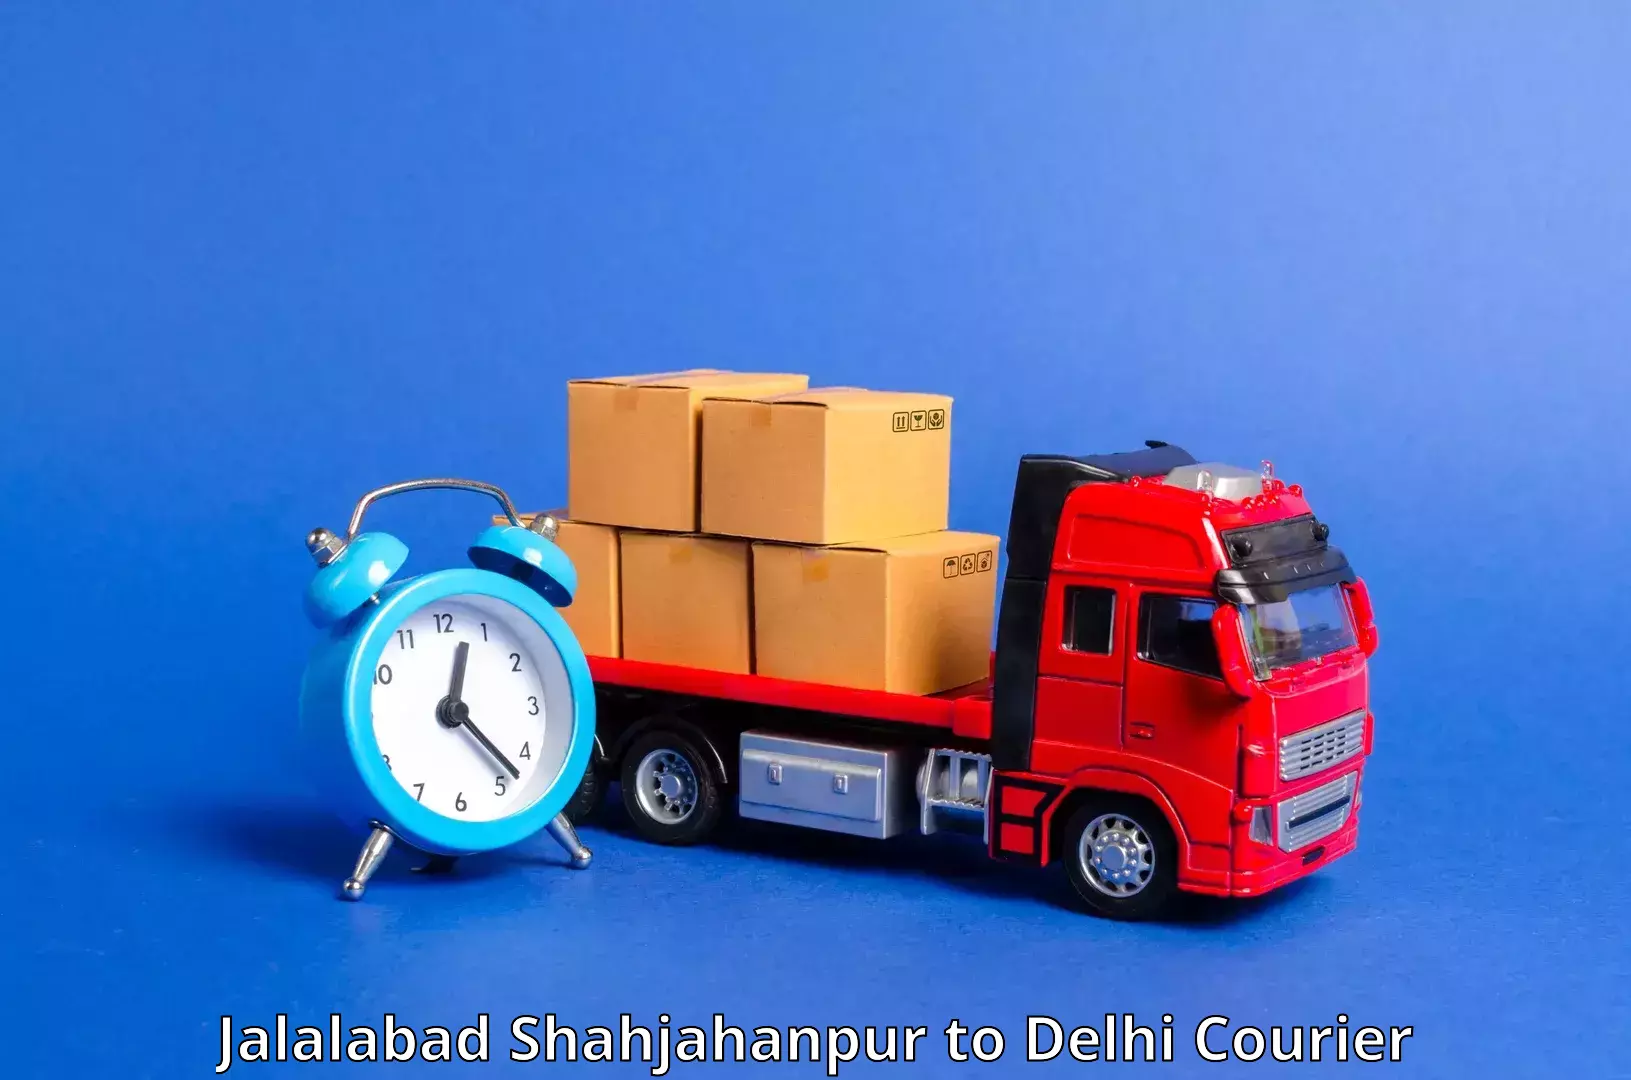 Next-day freight services Jalalabad Shahjahanpur to University of Delhi